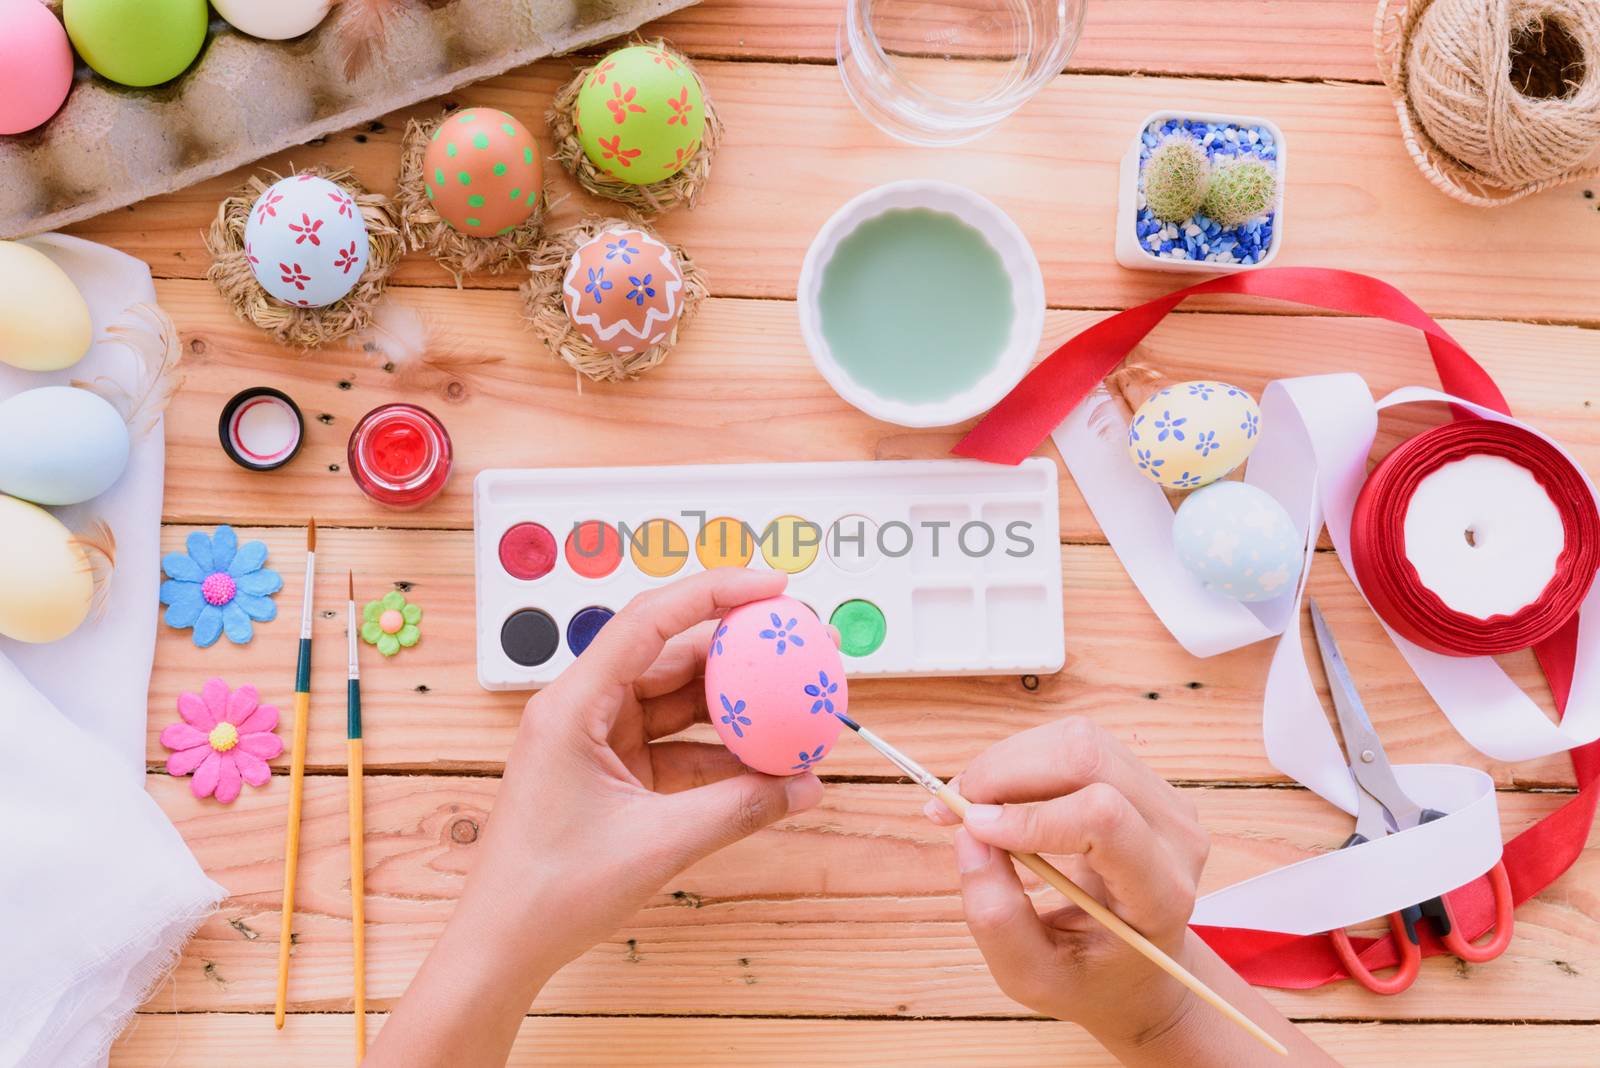 Happy easter! A woman hand painting Easter eggs. Happy family preparing for Easter.